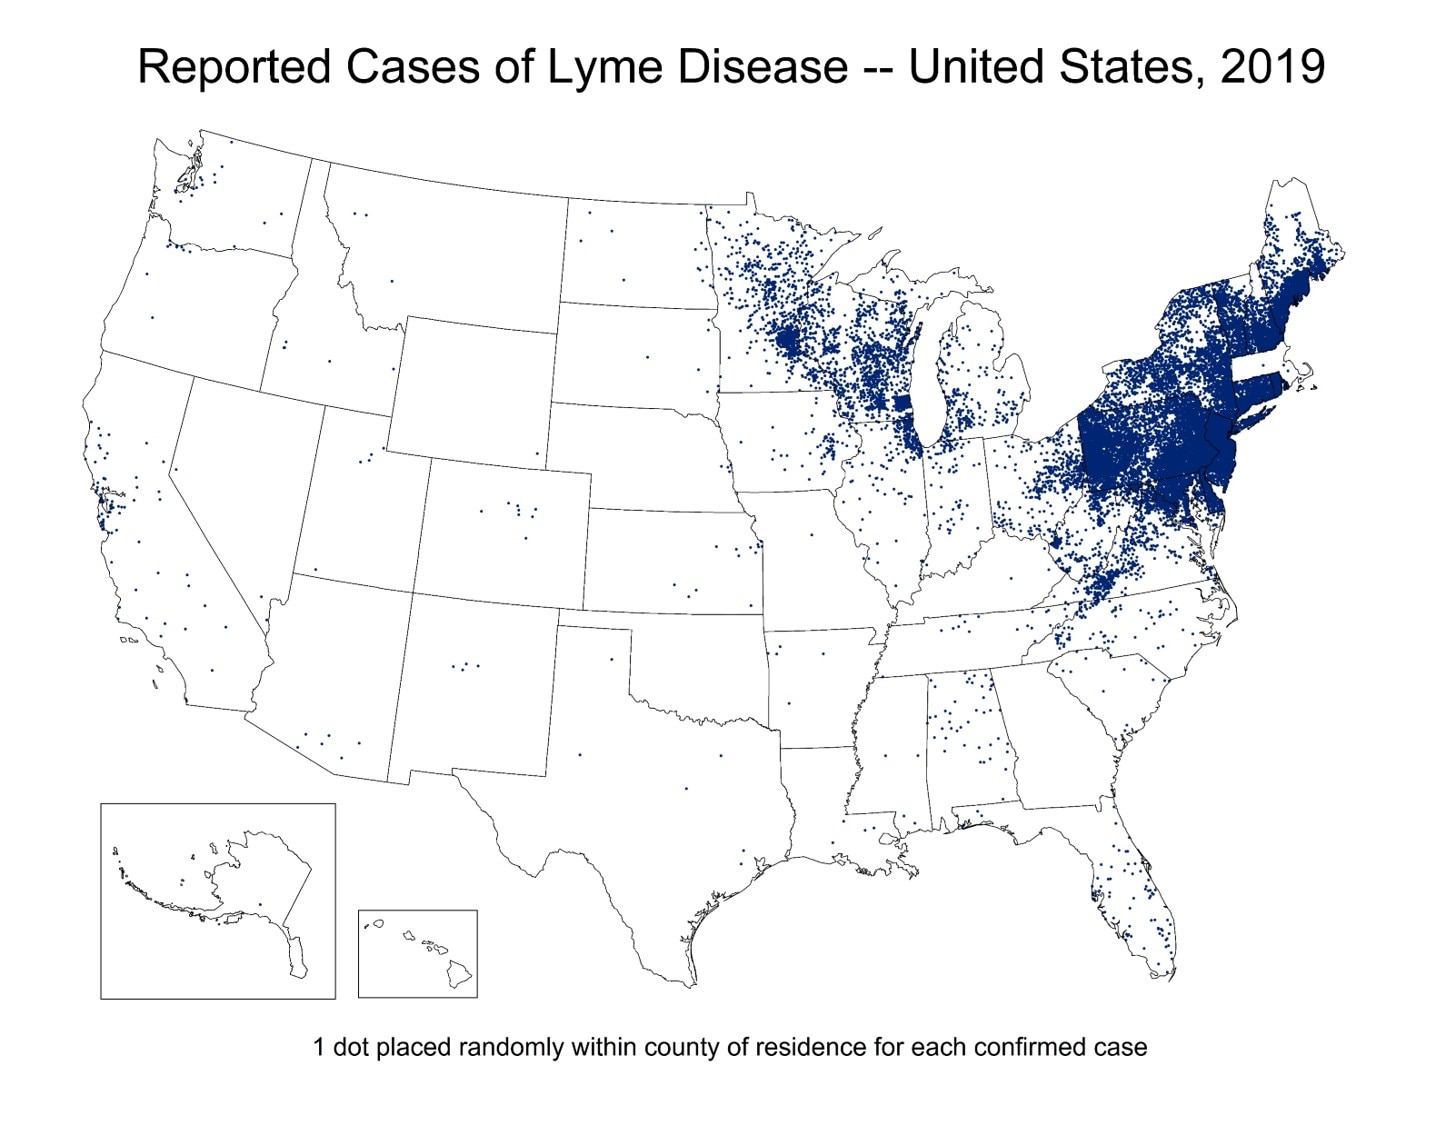 Reported Cases of Lyme Disease Distribution in 2019